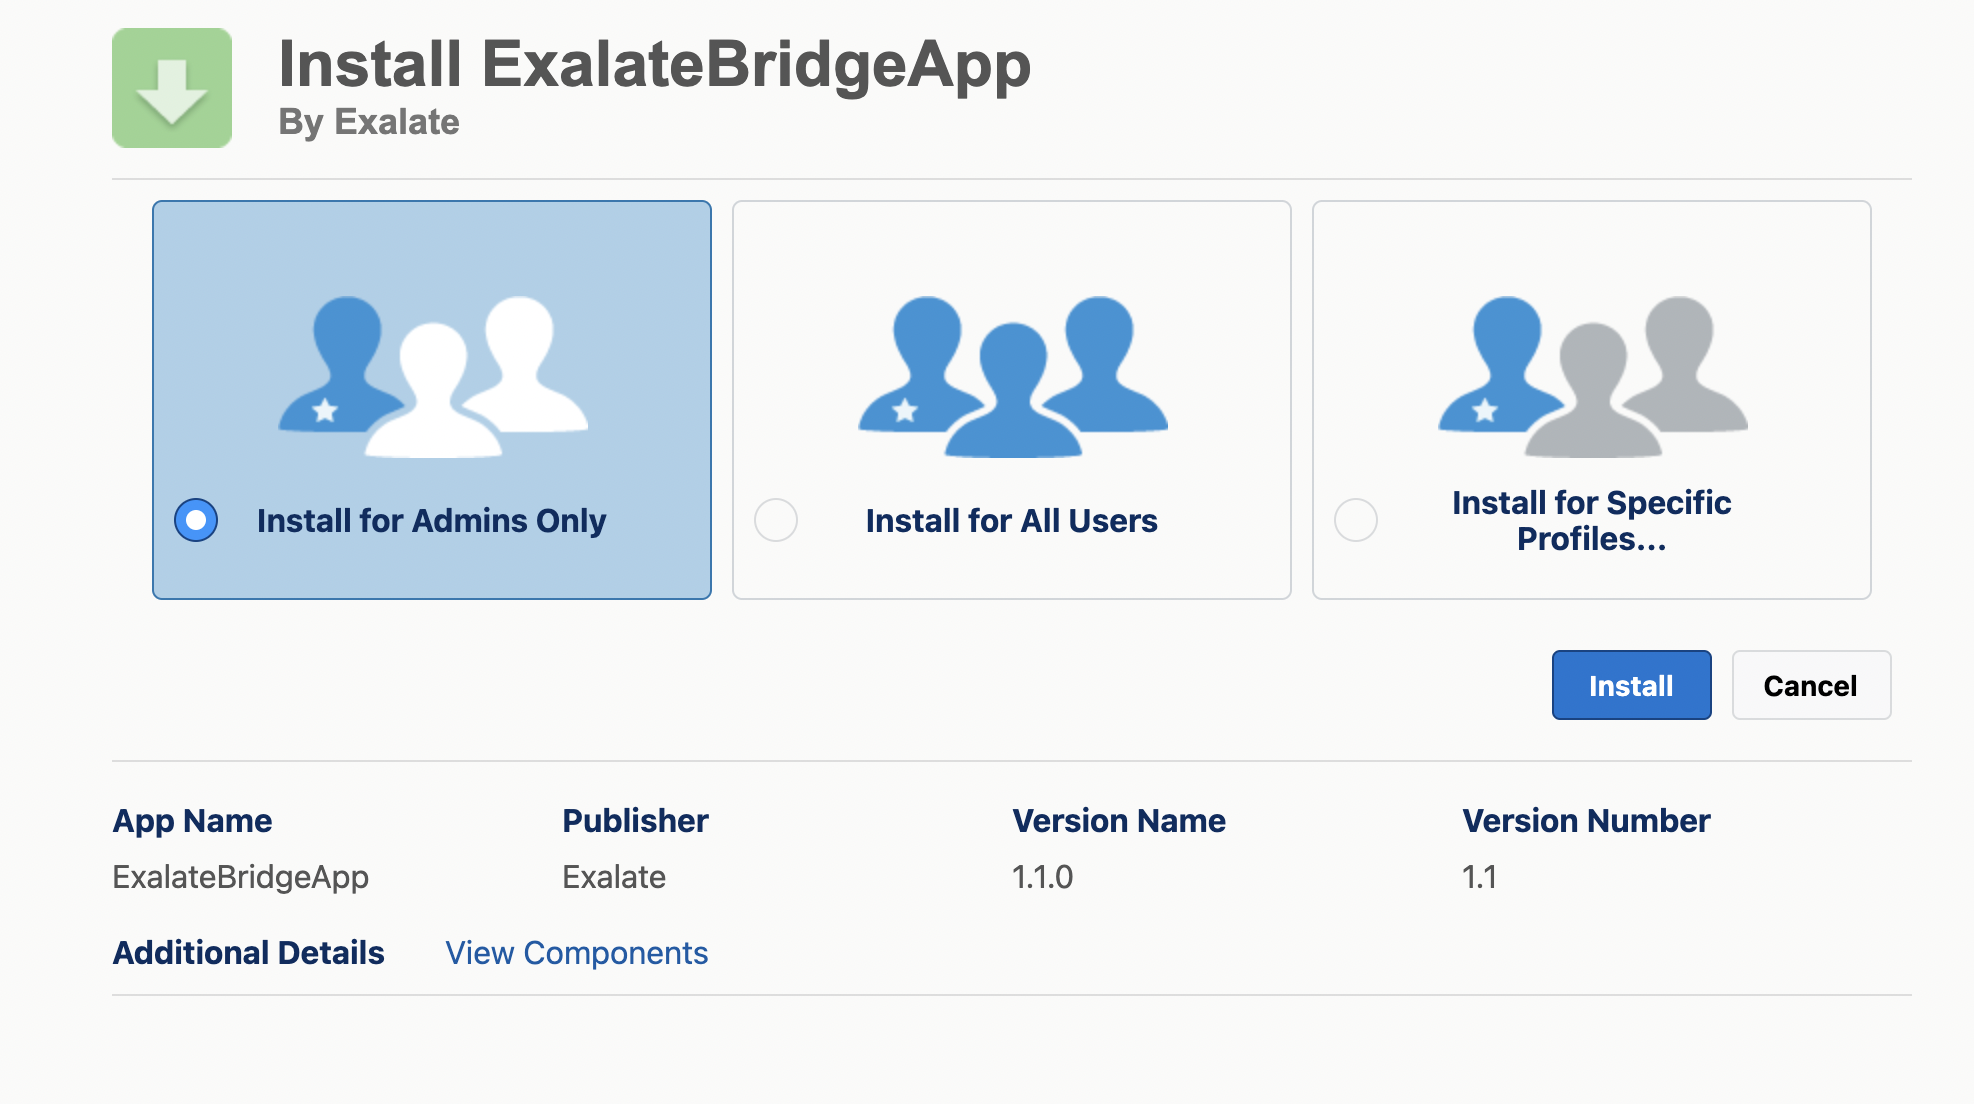 Access to the Exalate app on Salesforce